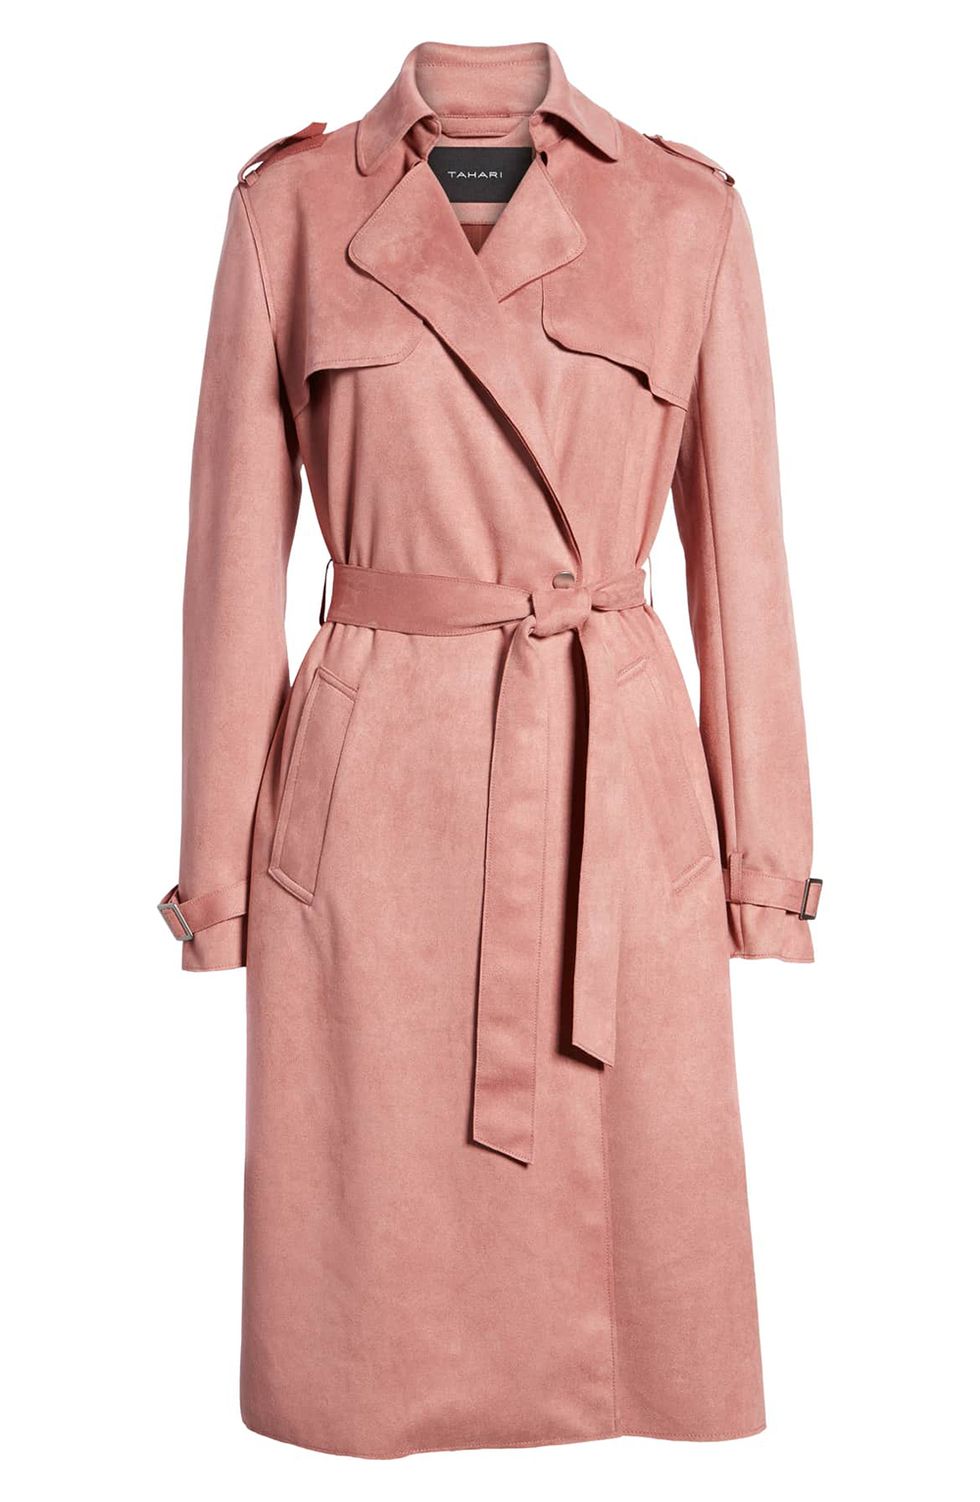 Clothing, Trench coat, Coat, Outerwear, Overcoat, Sleeve, Collar, Pink, Day dress, Dress, 